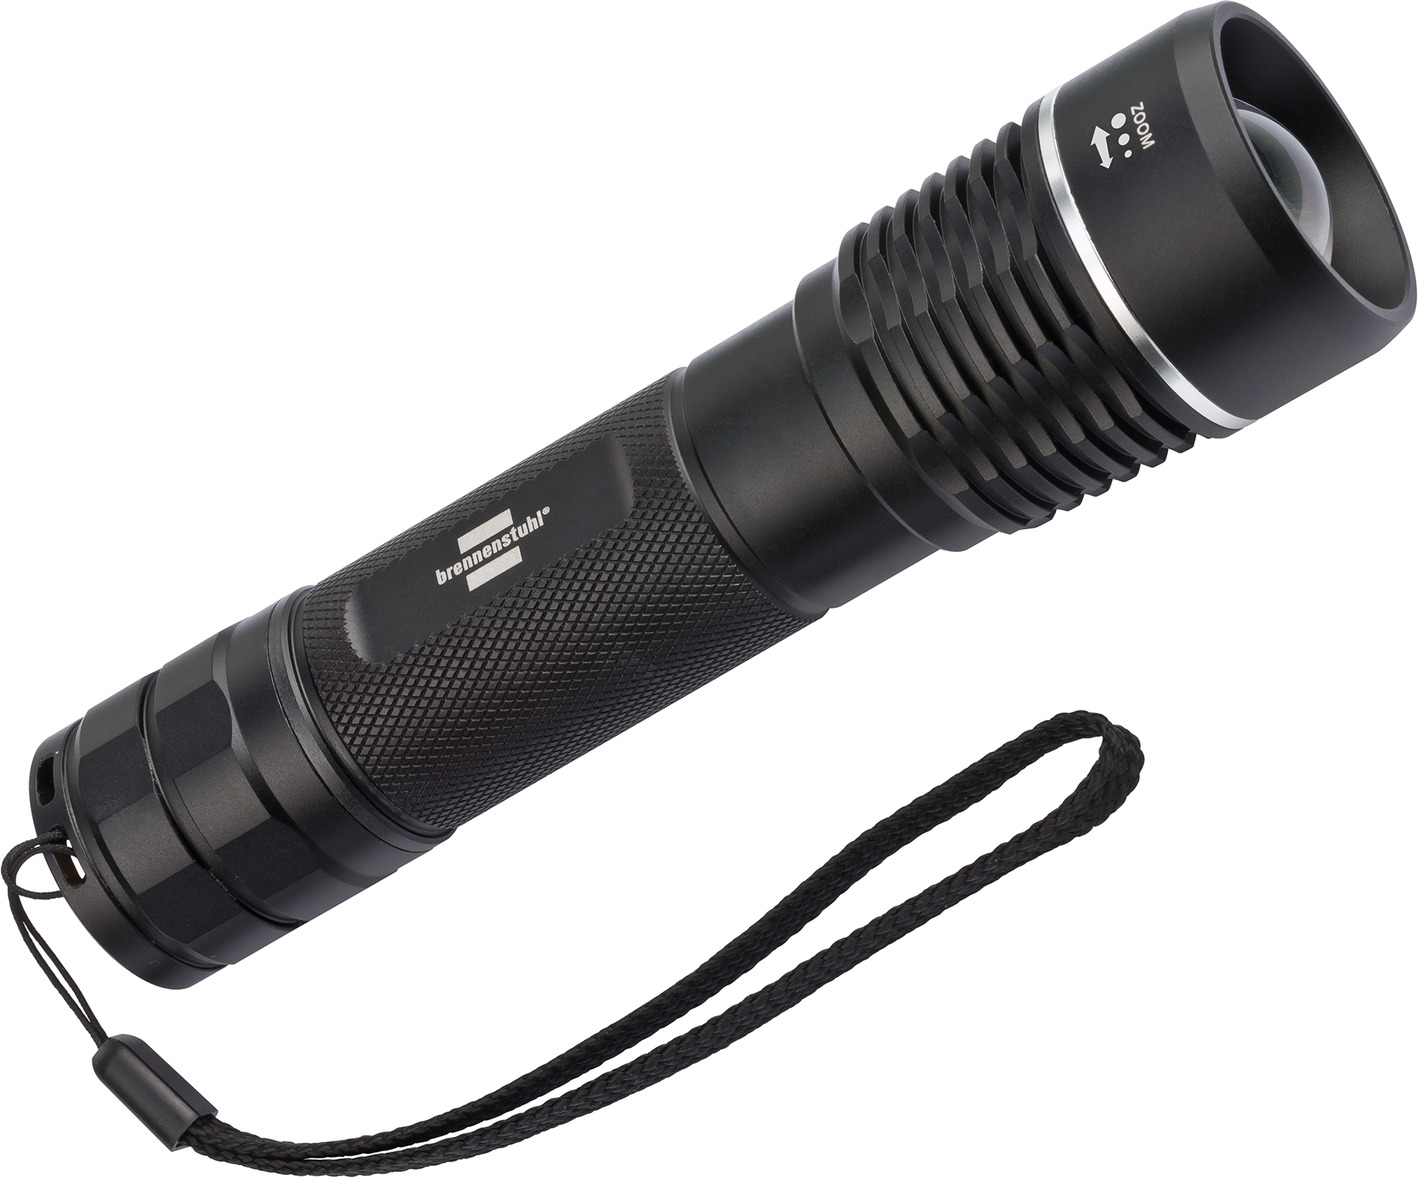 Torcia tascabile a LED con batteria ricaricabile LuxPremium TL 1200 AF,  IP67, CREE-LED, 20W 1250lm